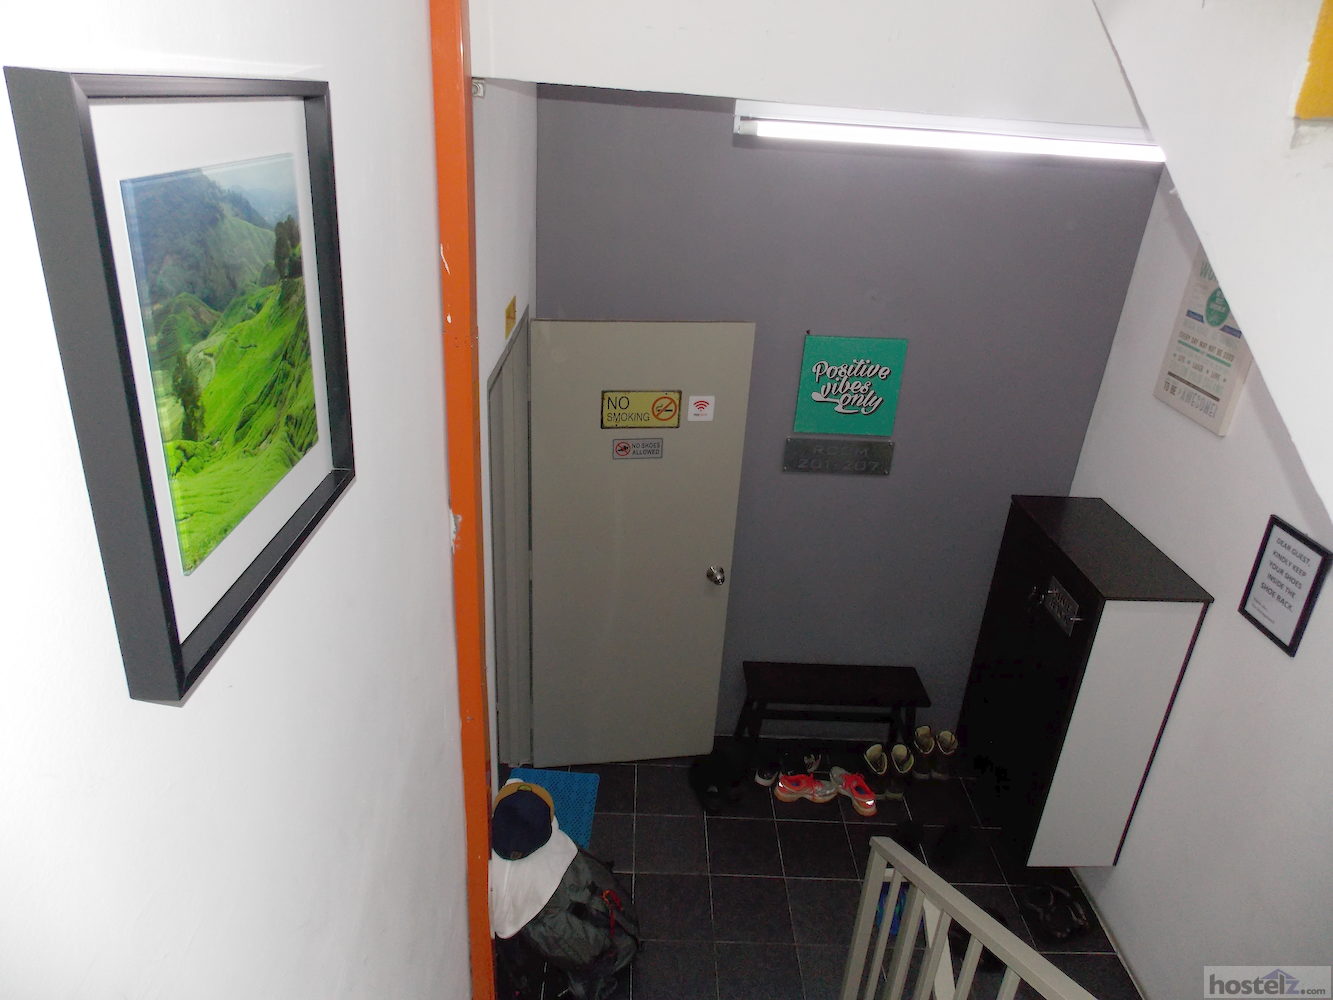 Bed Station Guest House, Tanah Rata